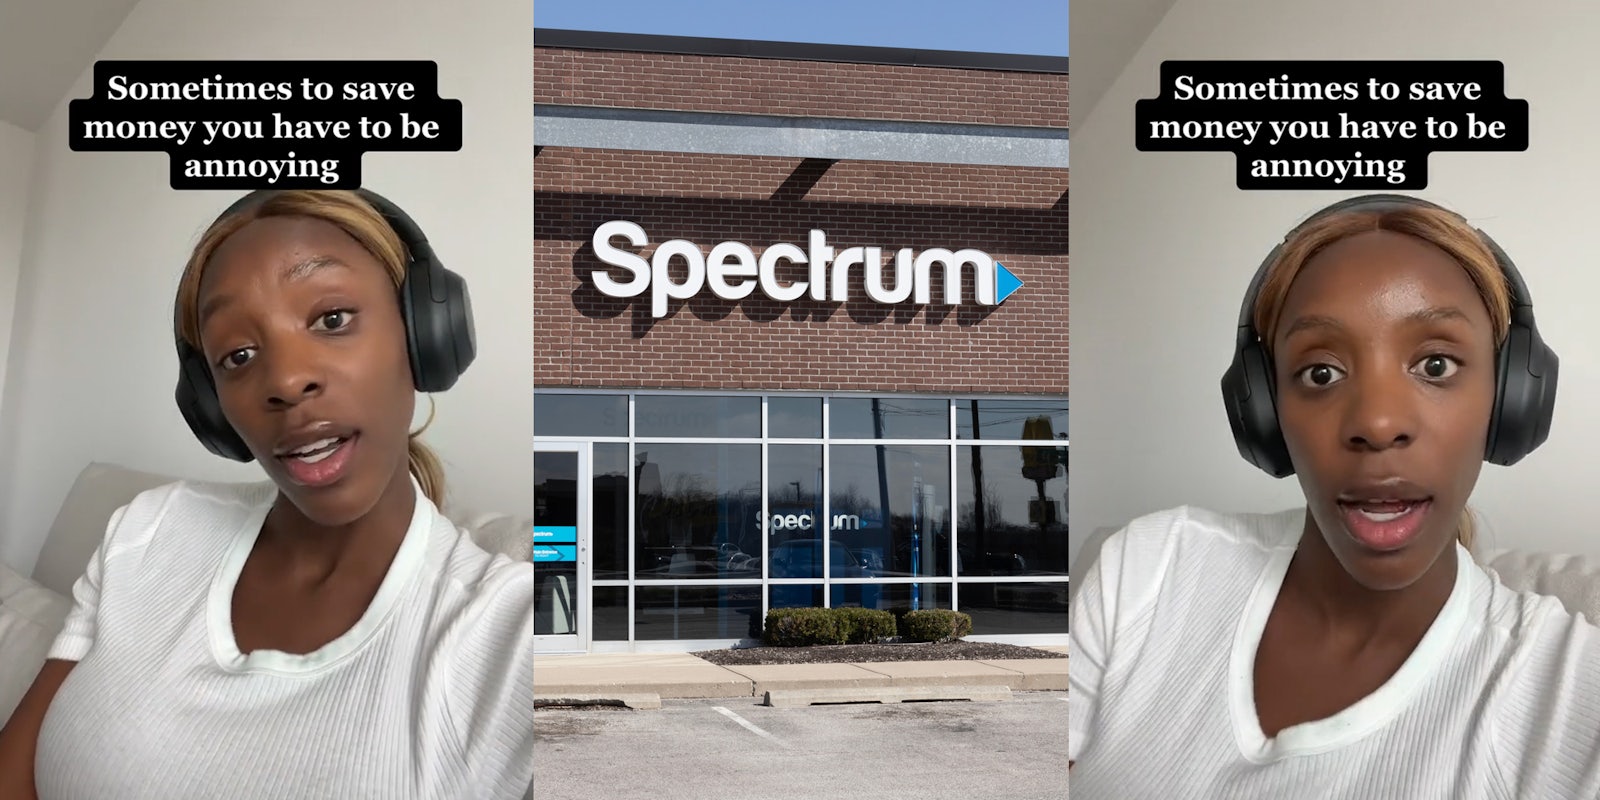 Spectrum customer speaking with caption 'Sometimes to save money you have to be annoying' (l) Spectrum sign on building (c) Spectrum customer speaking with caption 'Sometimes to save money you have to be annoying' (r)